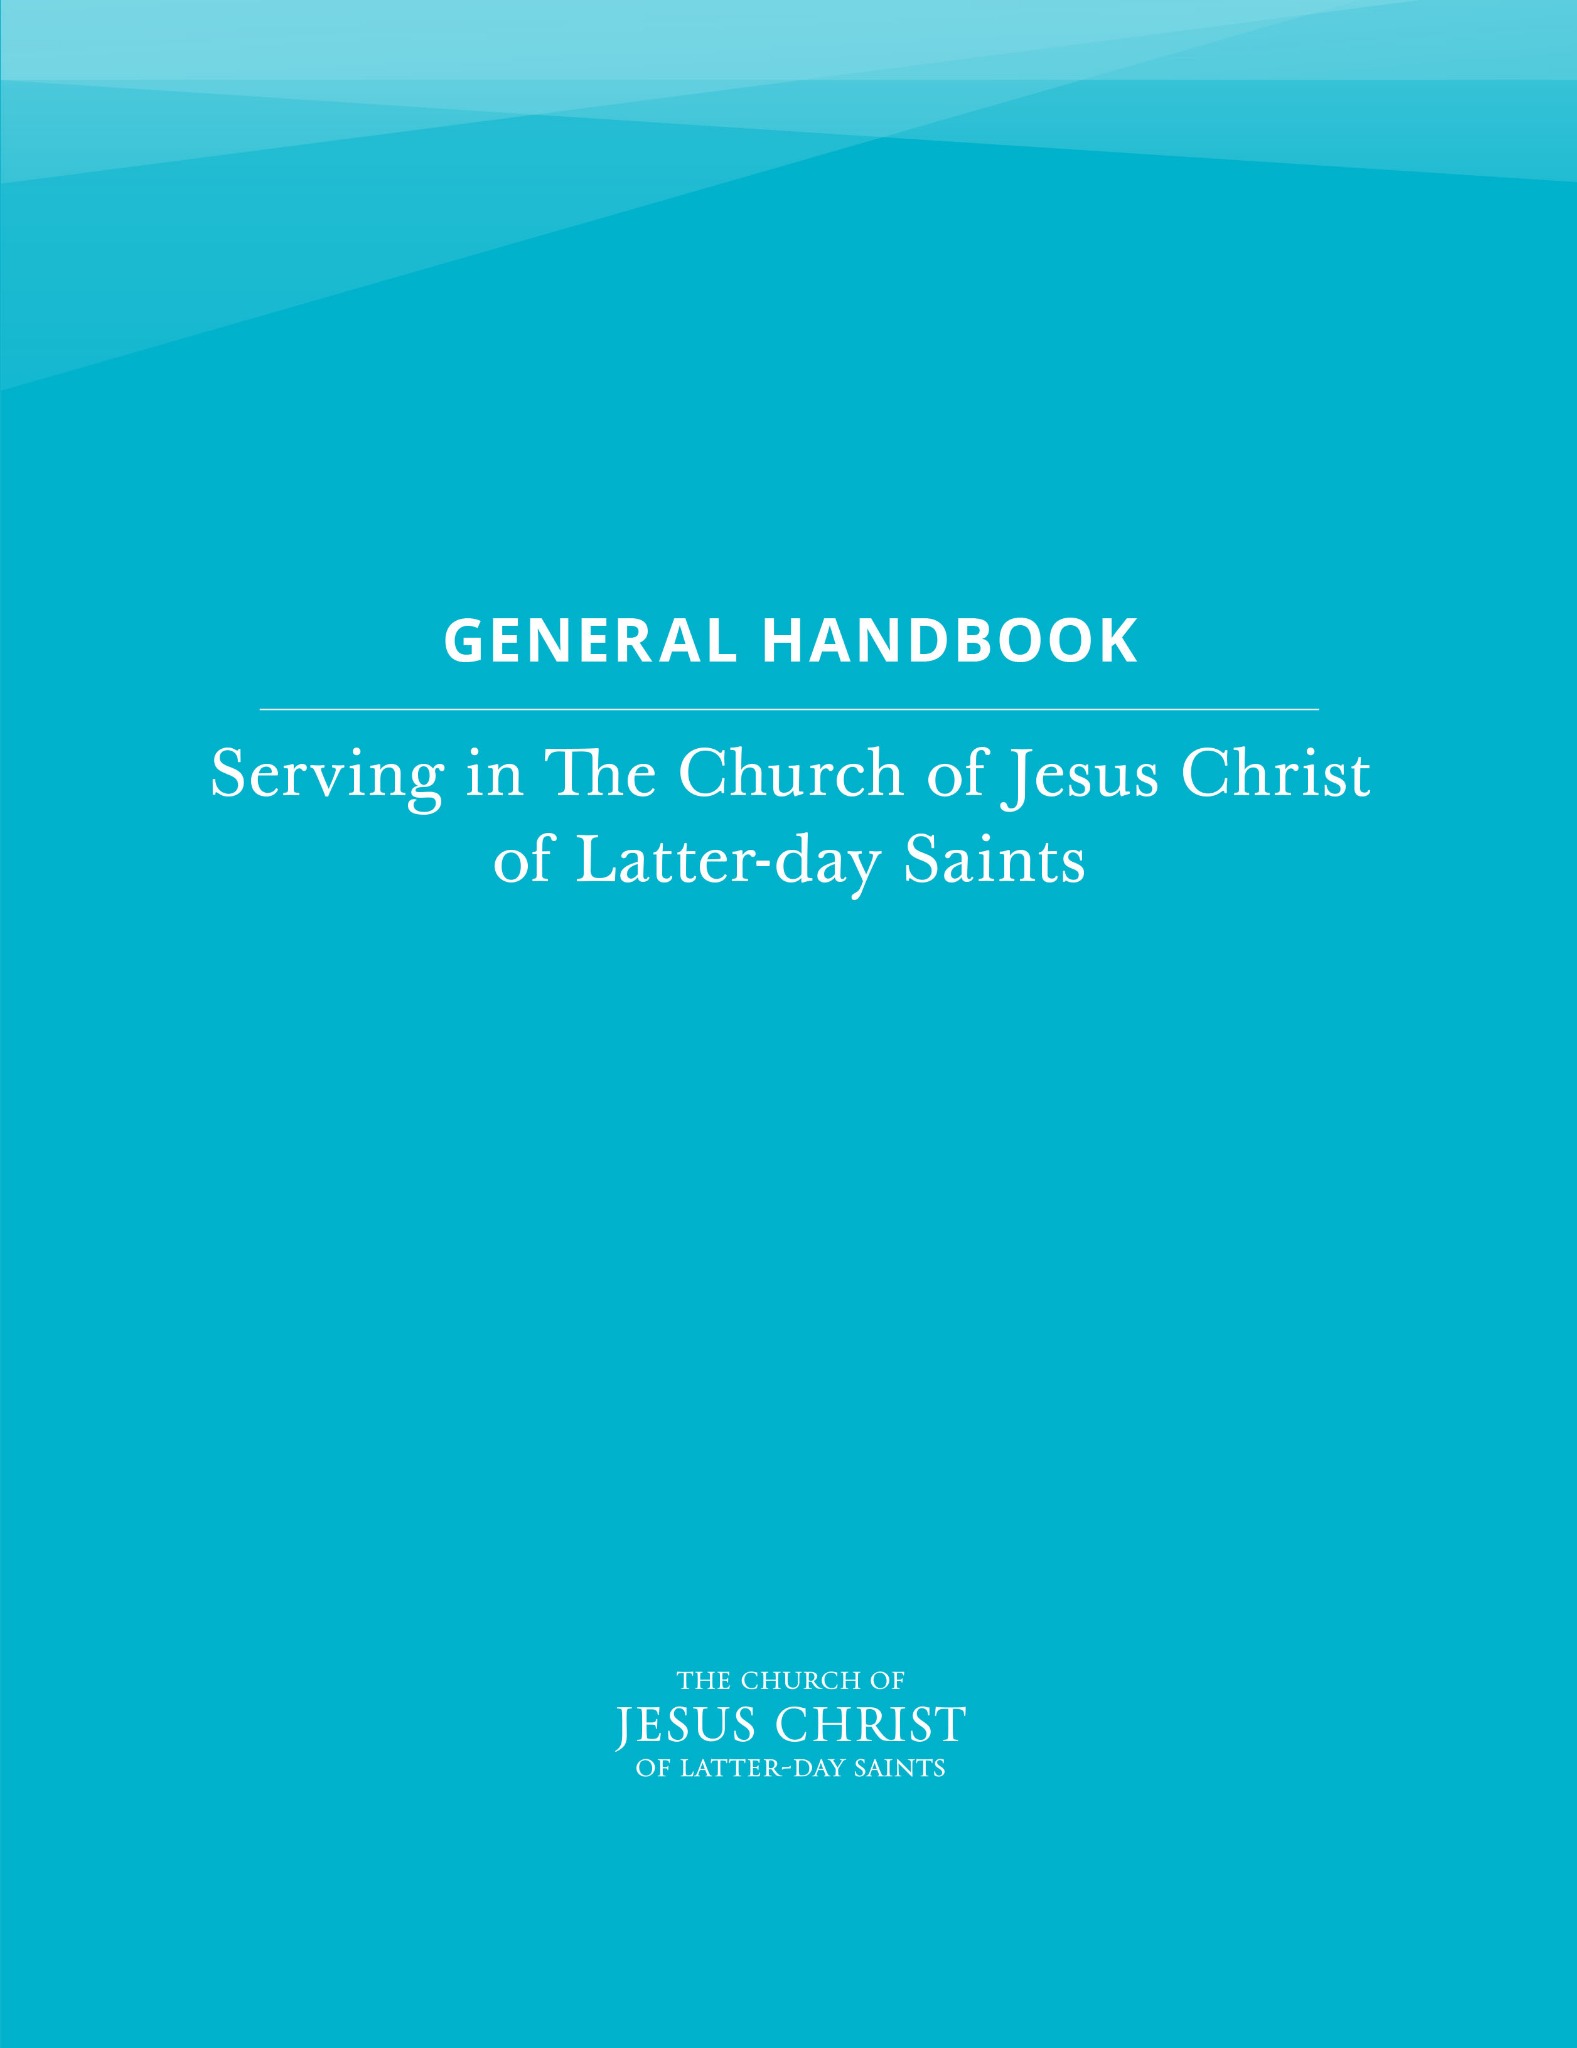 A Look Inside the New General Handbook for Church Leaders and Members